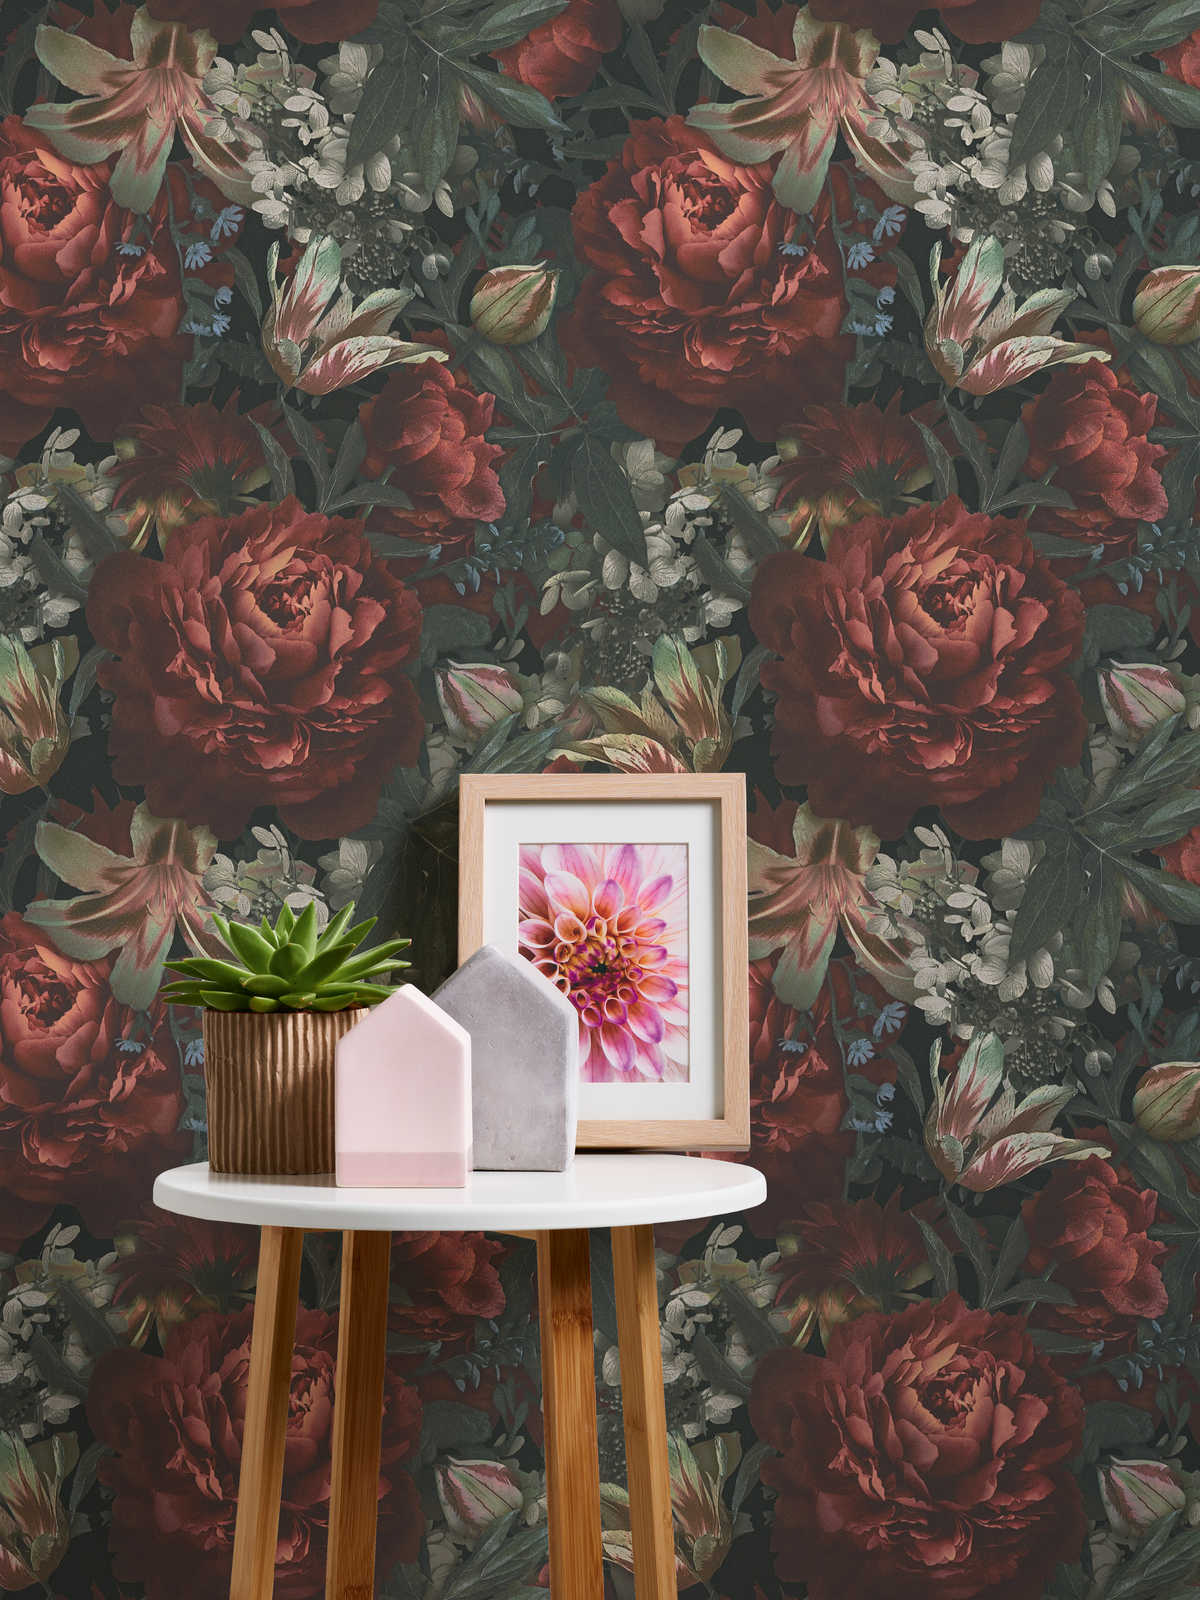             Floral wallpaper roses & tulips vintage style - green, red, cream
        